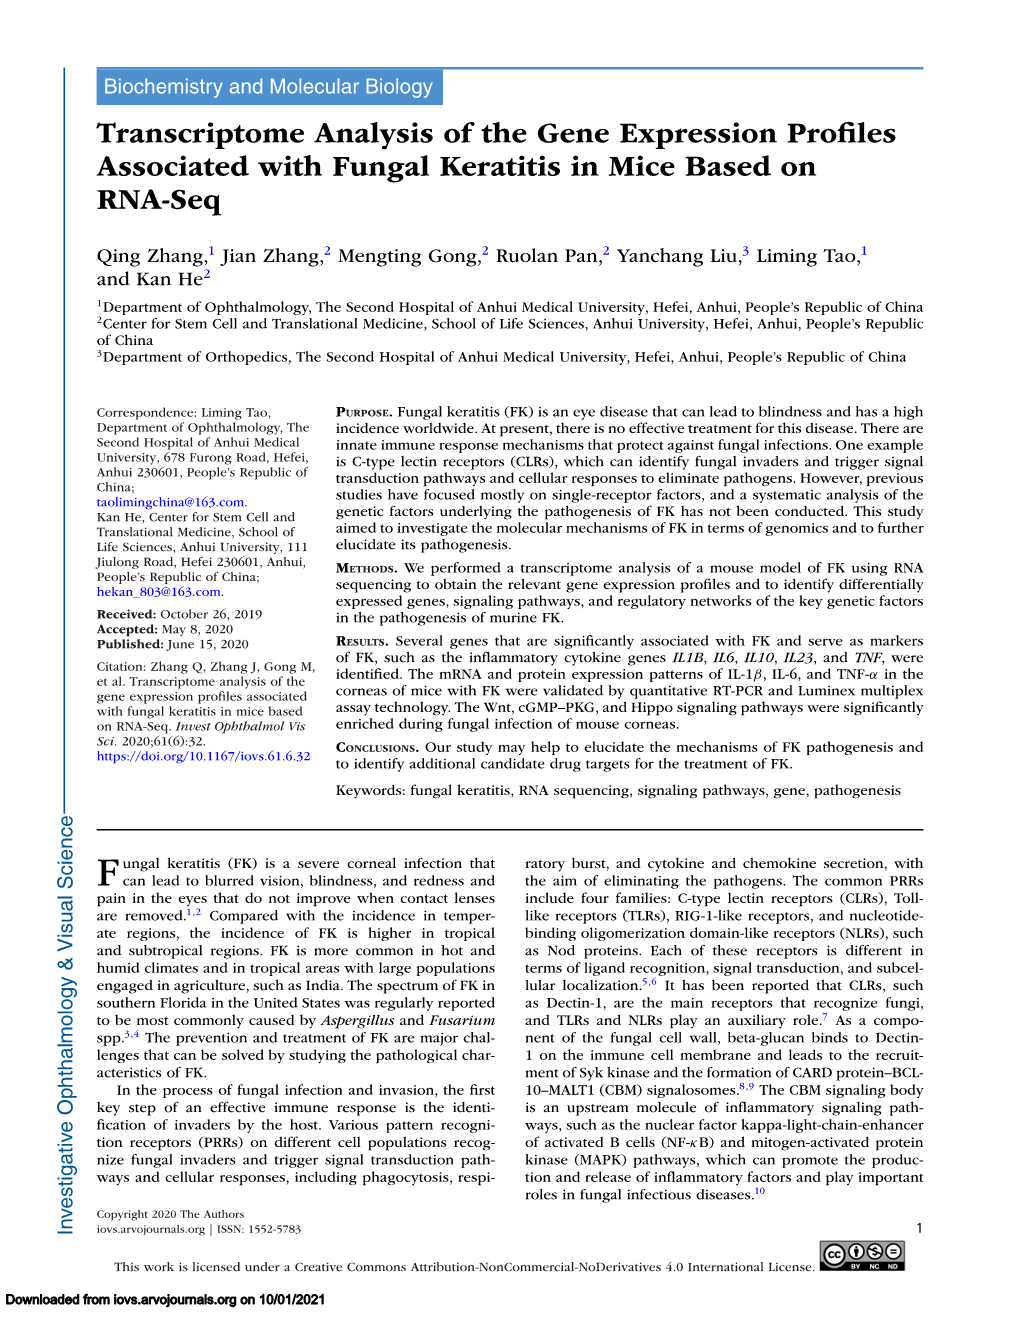 Transcriptome Analysis of the Gene Expression Profiles Associated with Fungal Keratitis in Mice Based on RNA-Seq